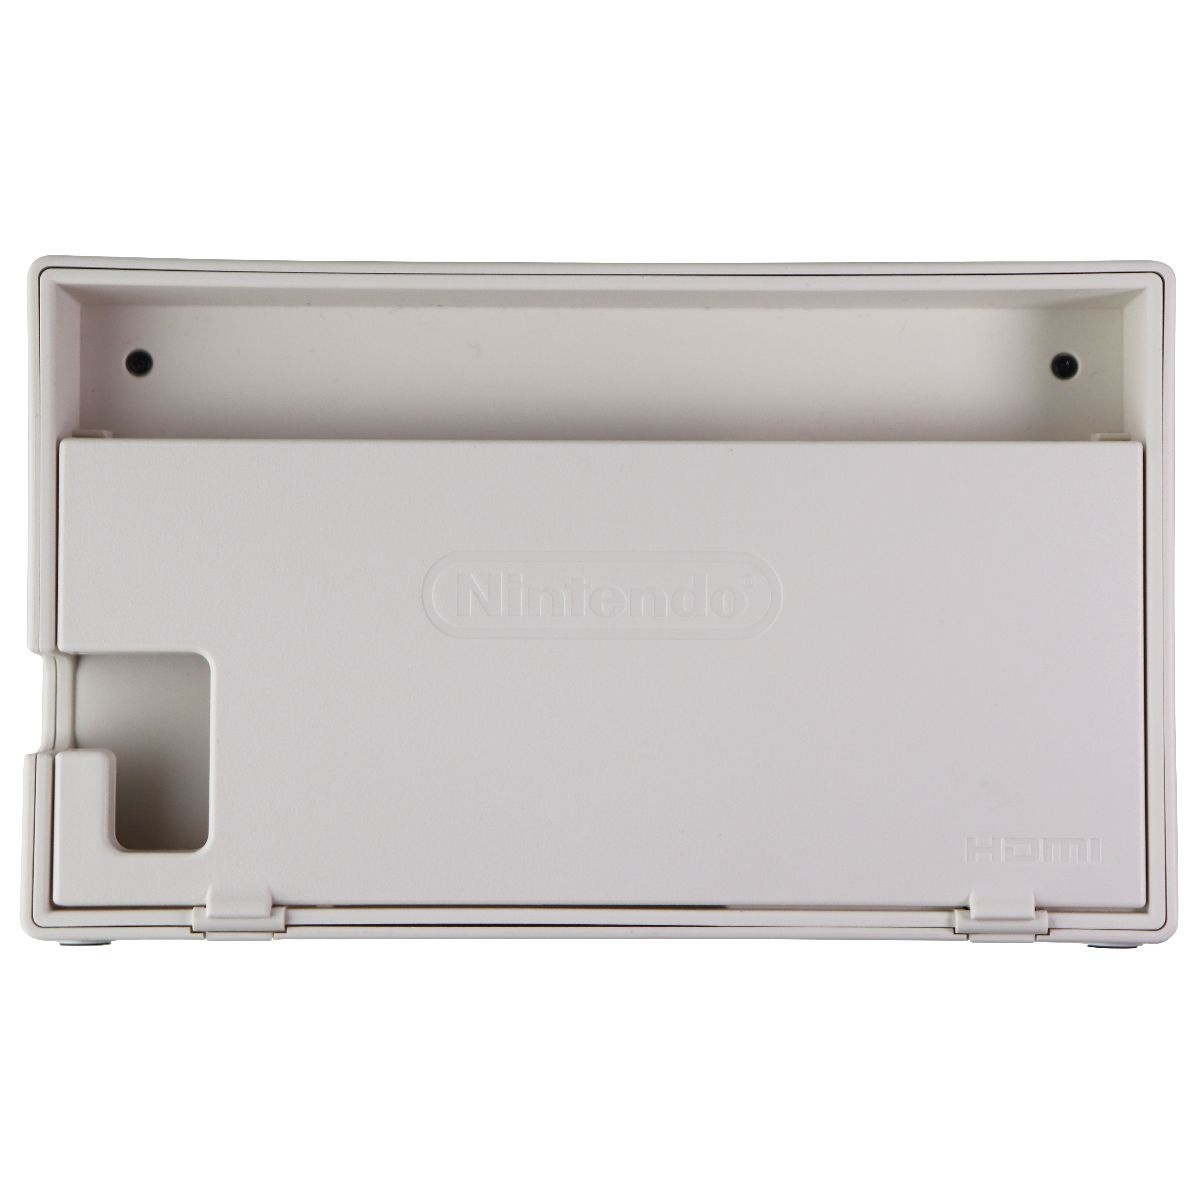 Pre-Owned Nintendo Switch Dock - Animal Crossing: New Horizons Edition (HAC-007) Dock Only (Refurbished: Good) - image 4 of 5